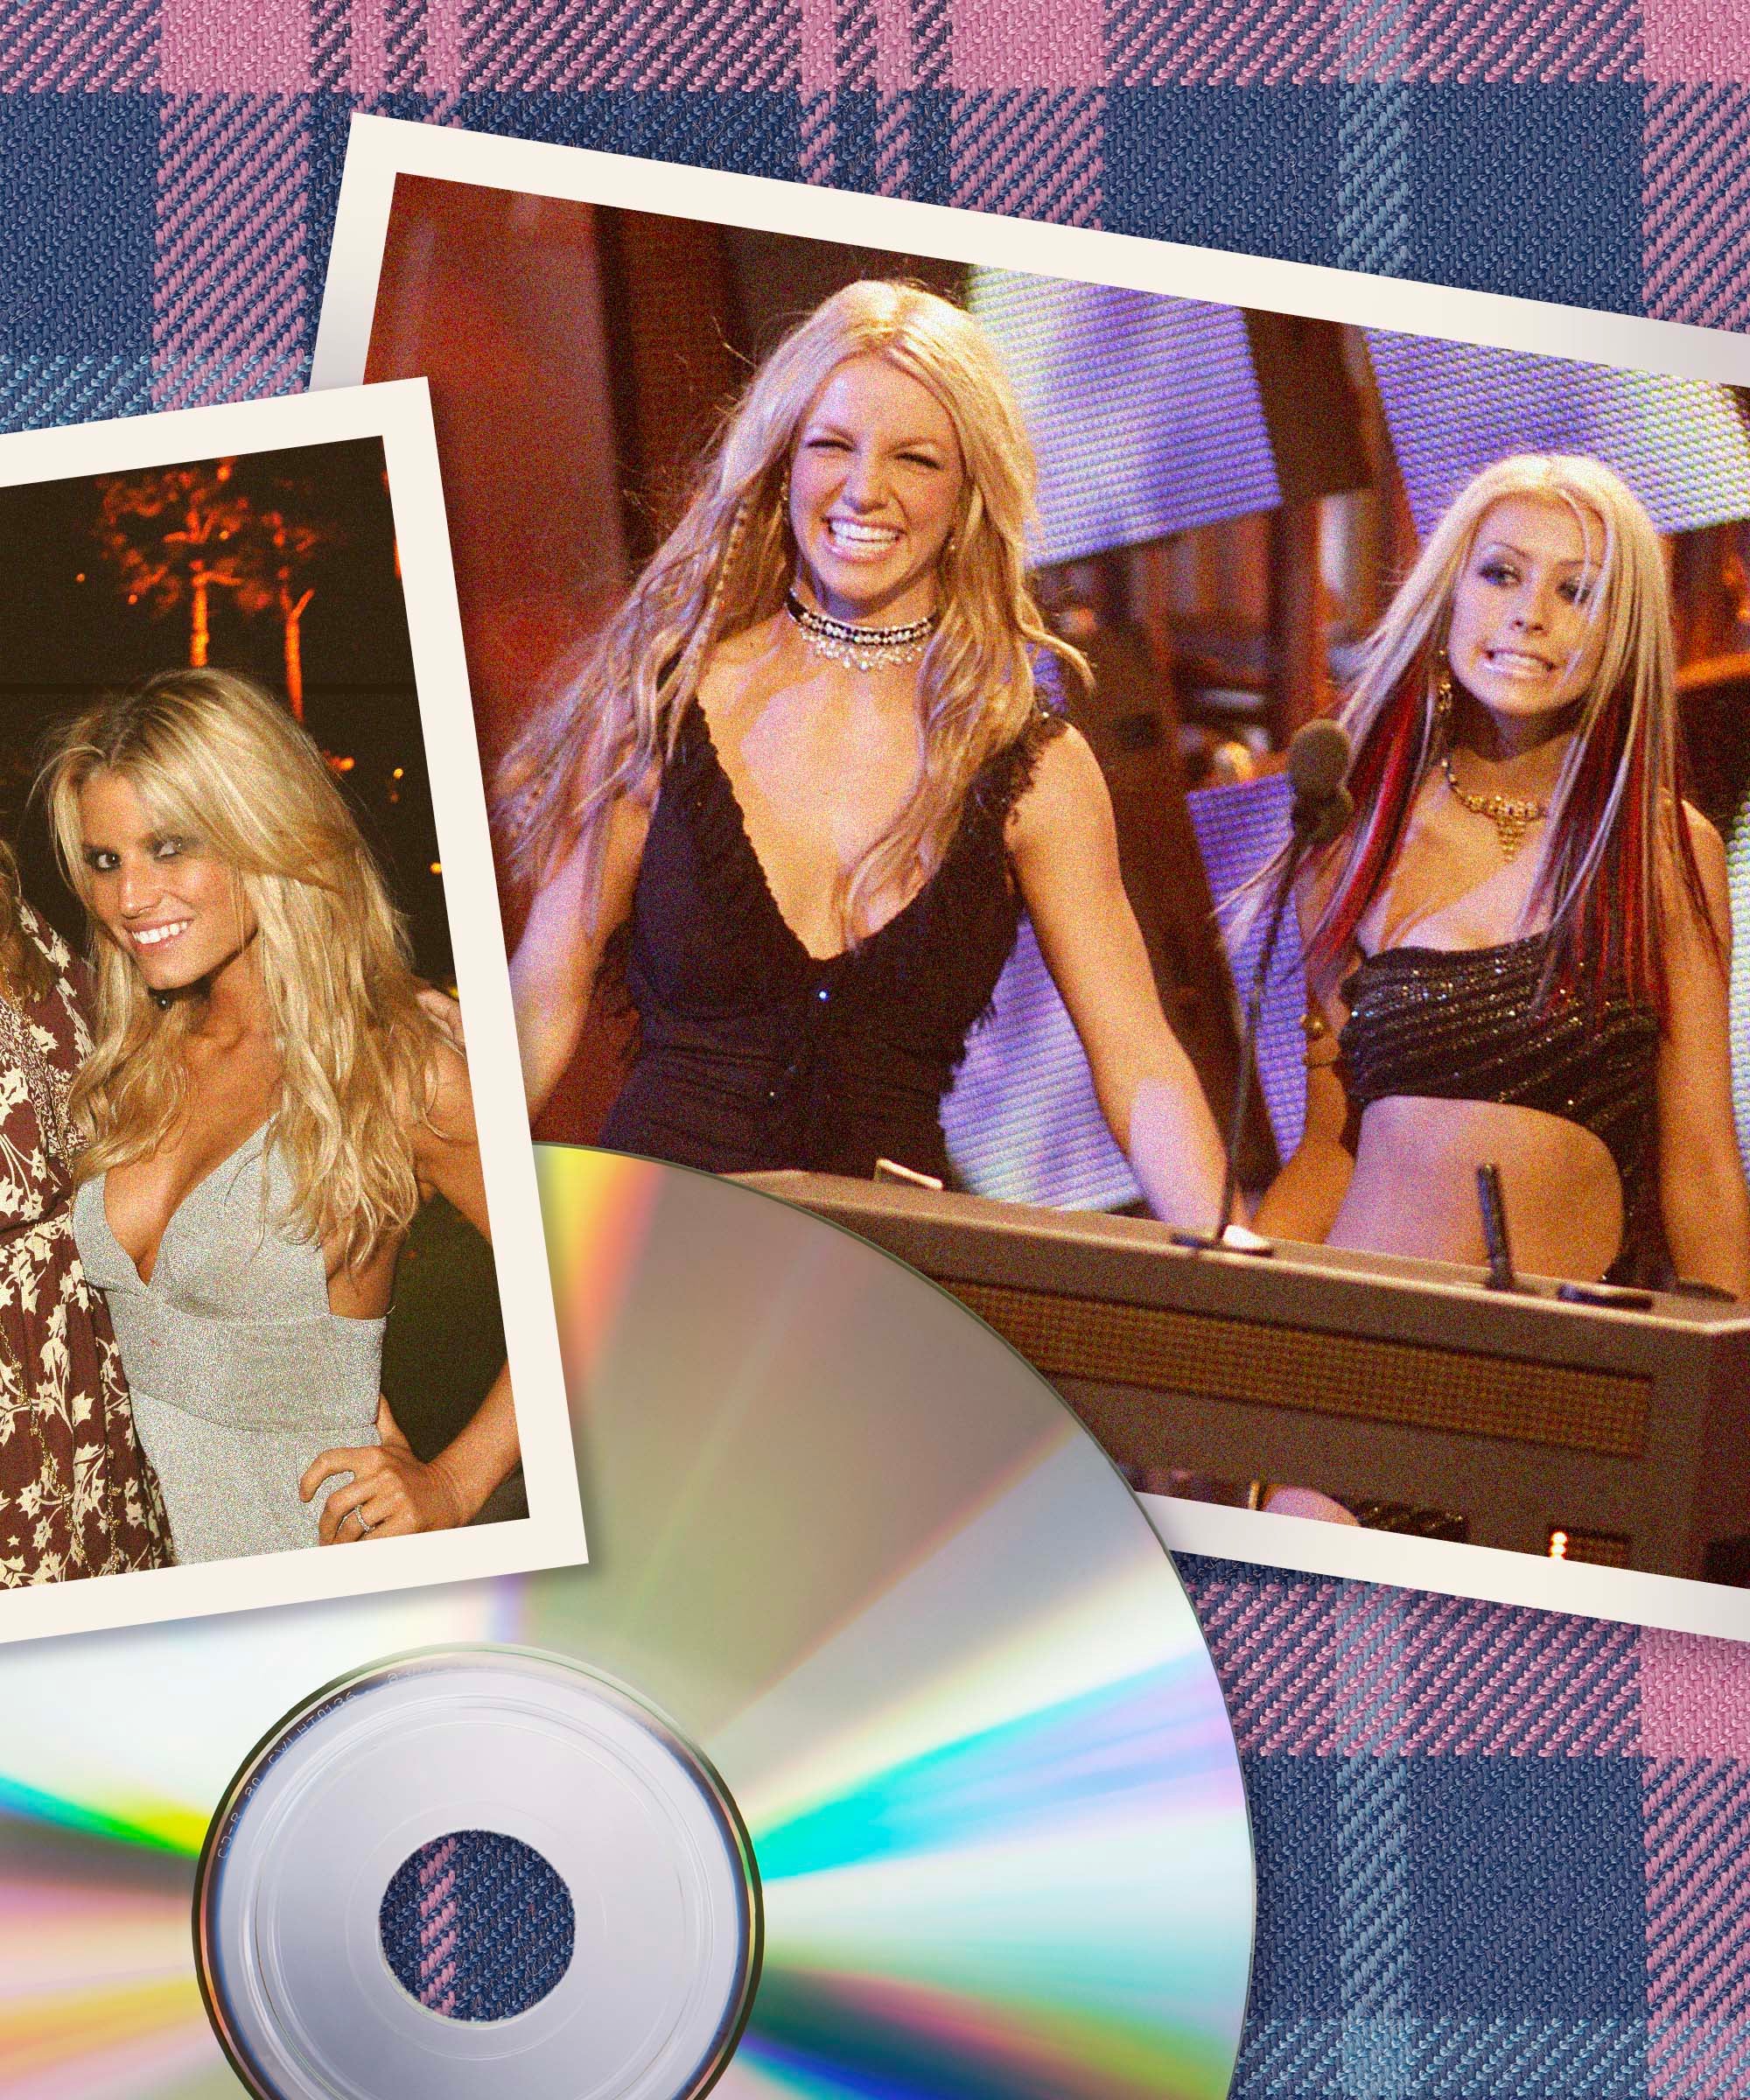 Free Britney Spears Sex Tapes - Why Britney & Christina Had To Be Virgins For The Media